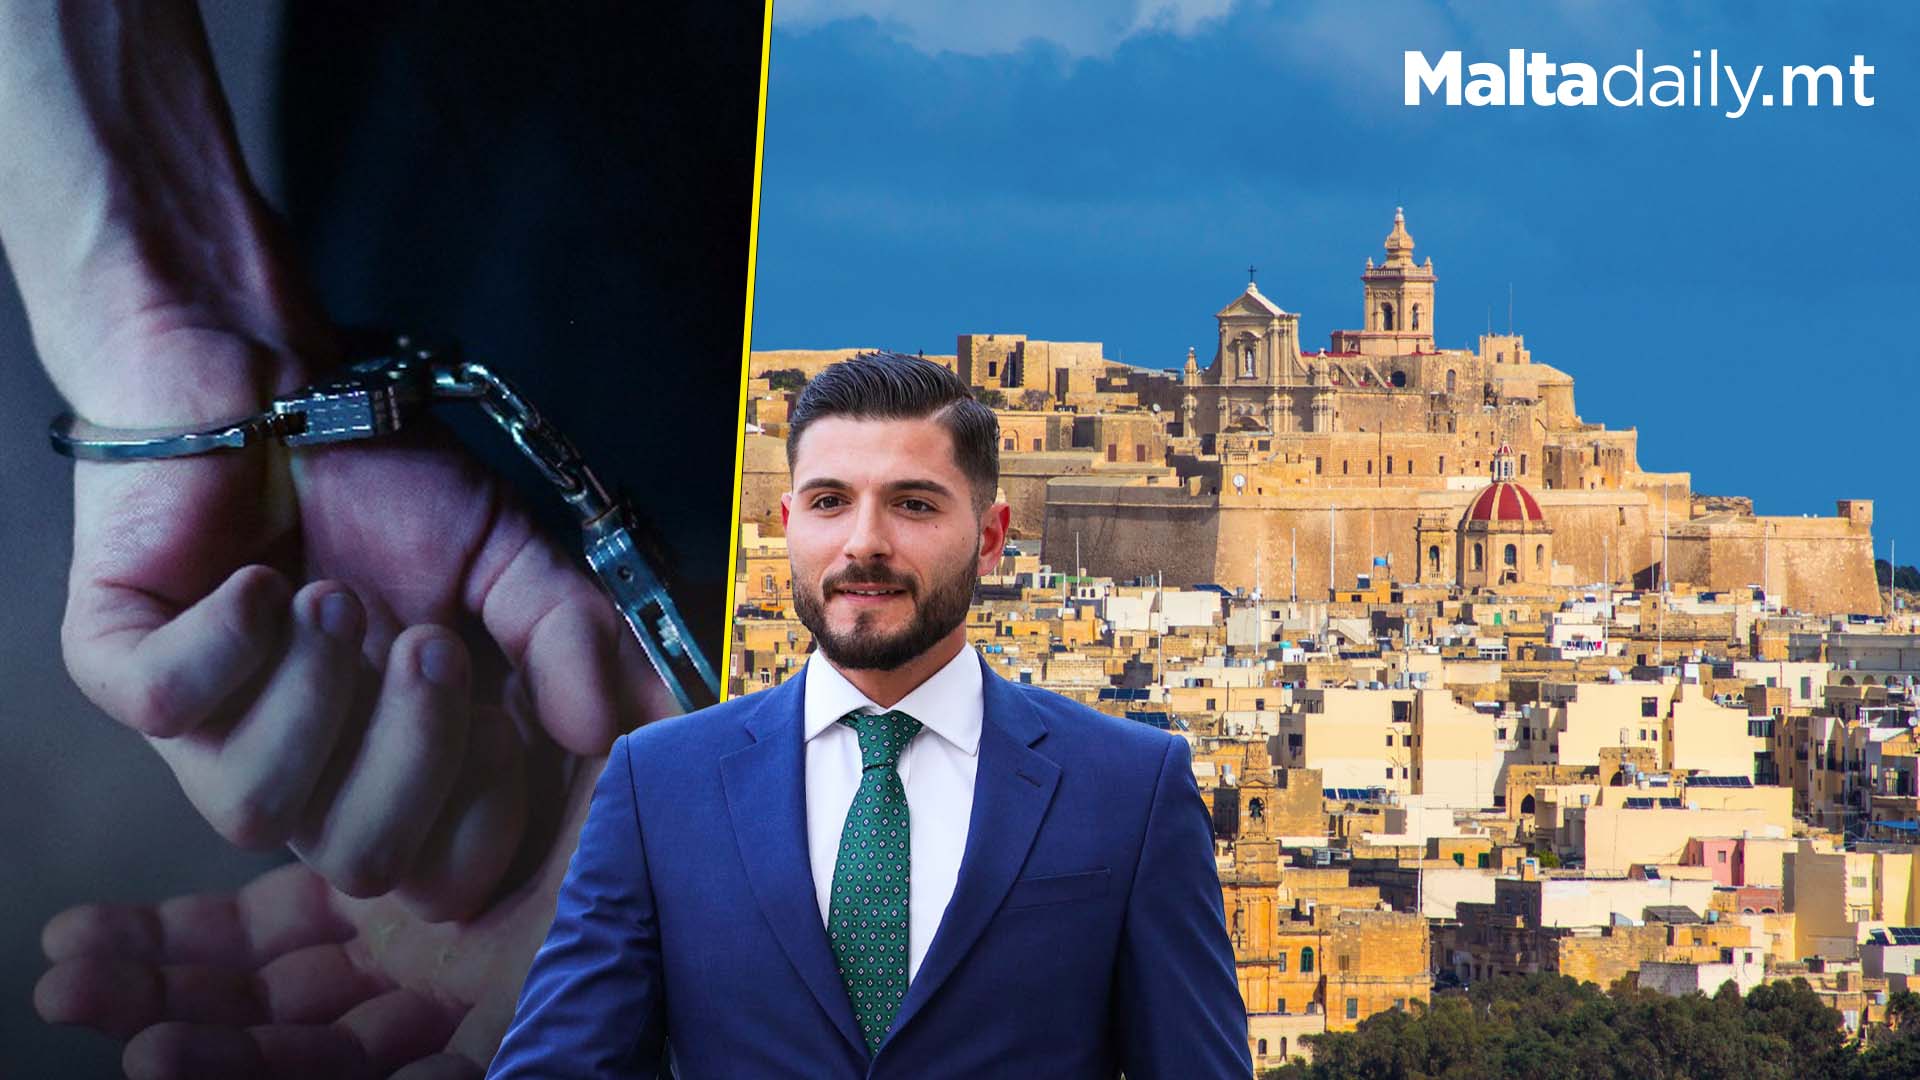 Police Arrest Two After String Of Robberies Across Malta And Gozo